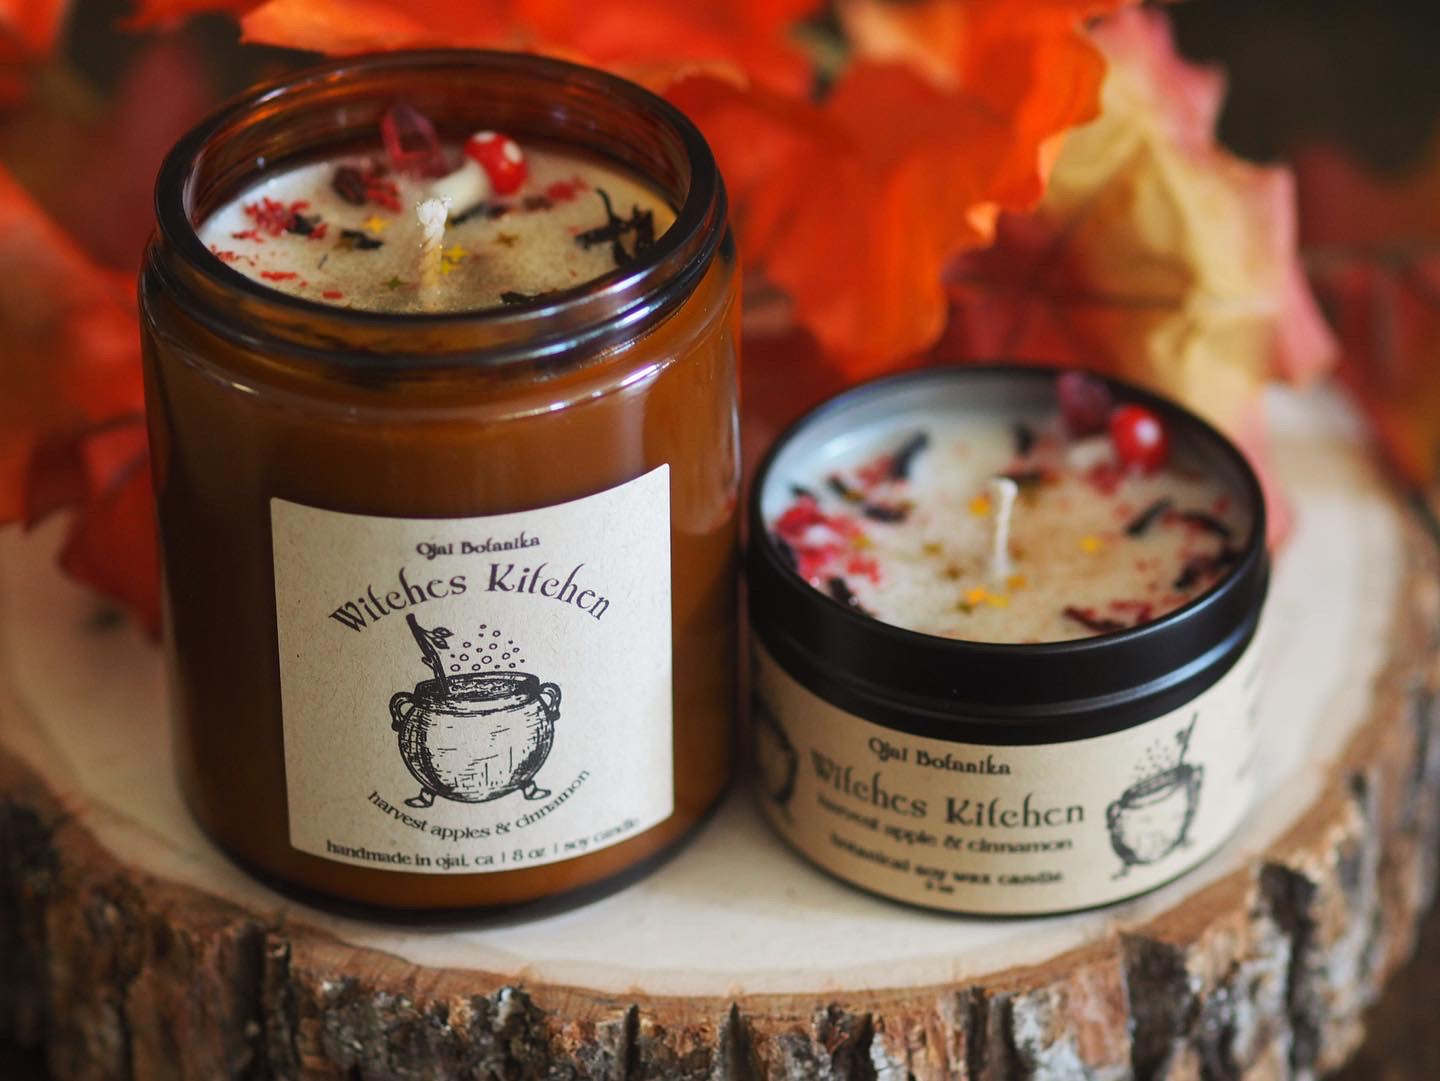 Witches Kitchen - Harvest Apple & Cinnamon - Handmade Soy Candle - Limited Edition